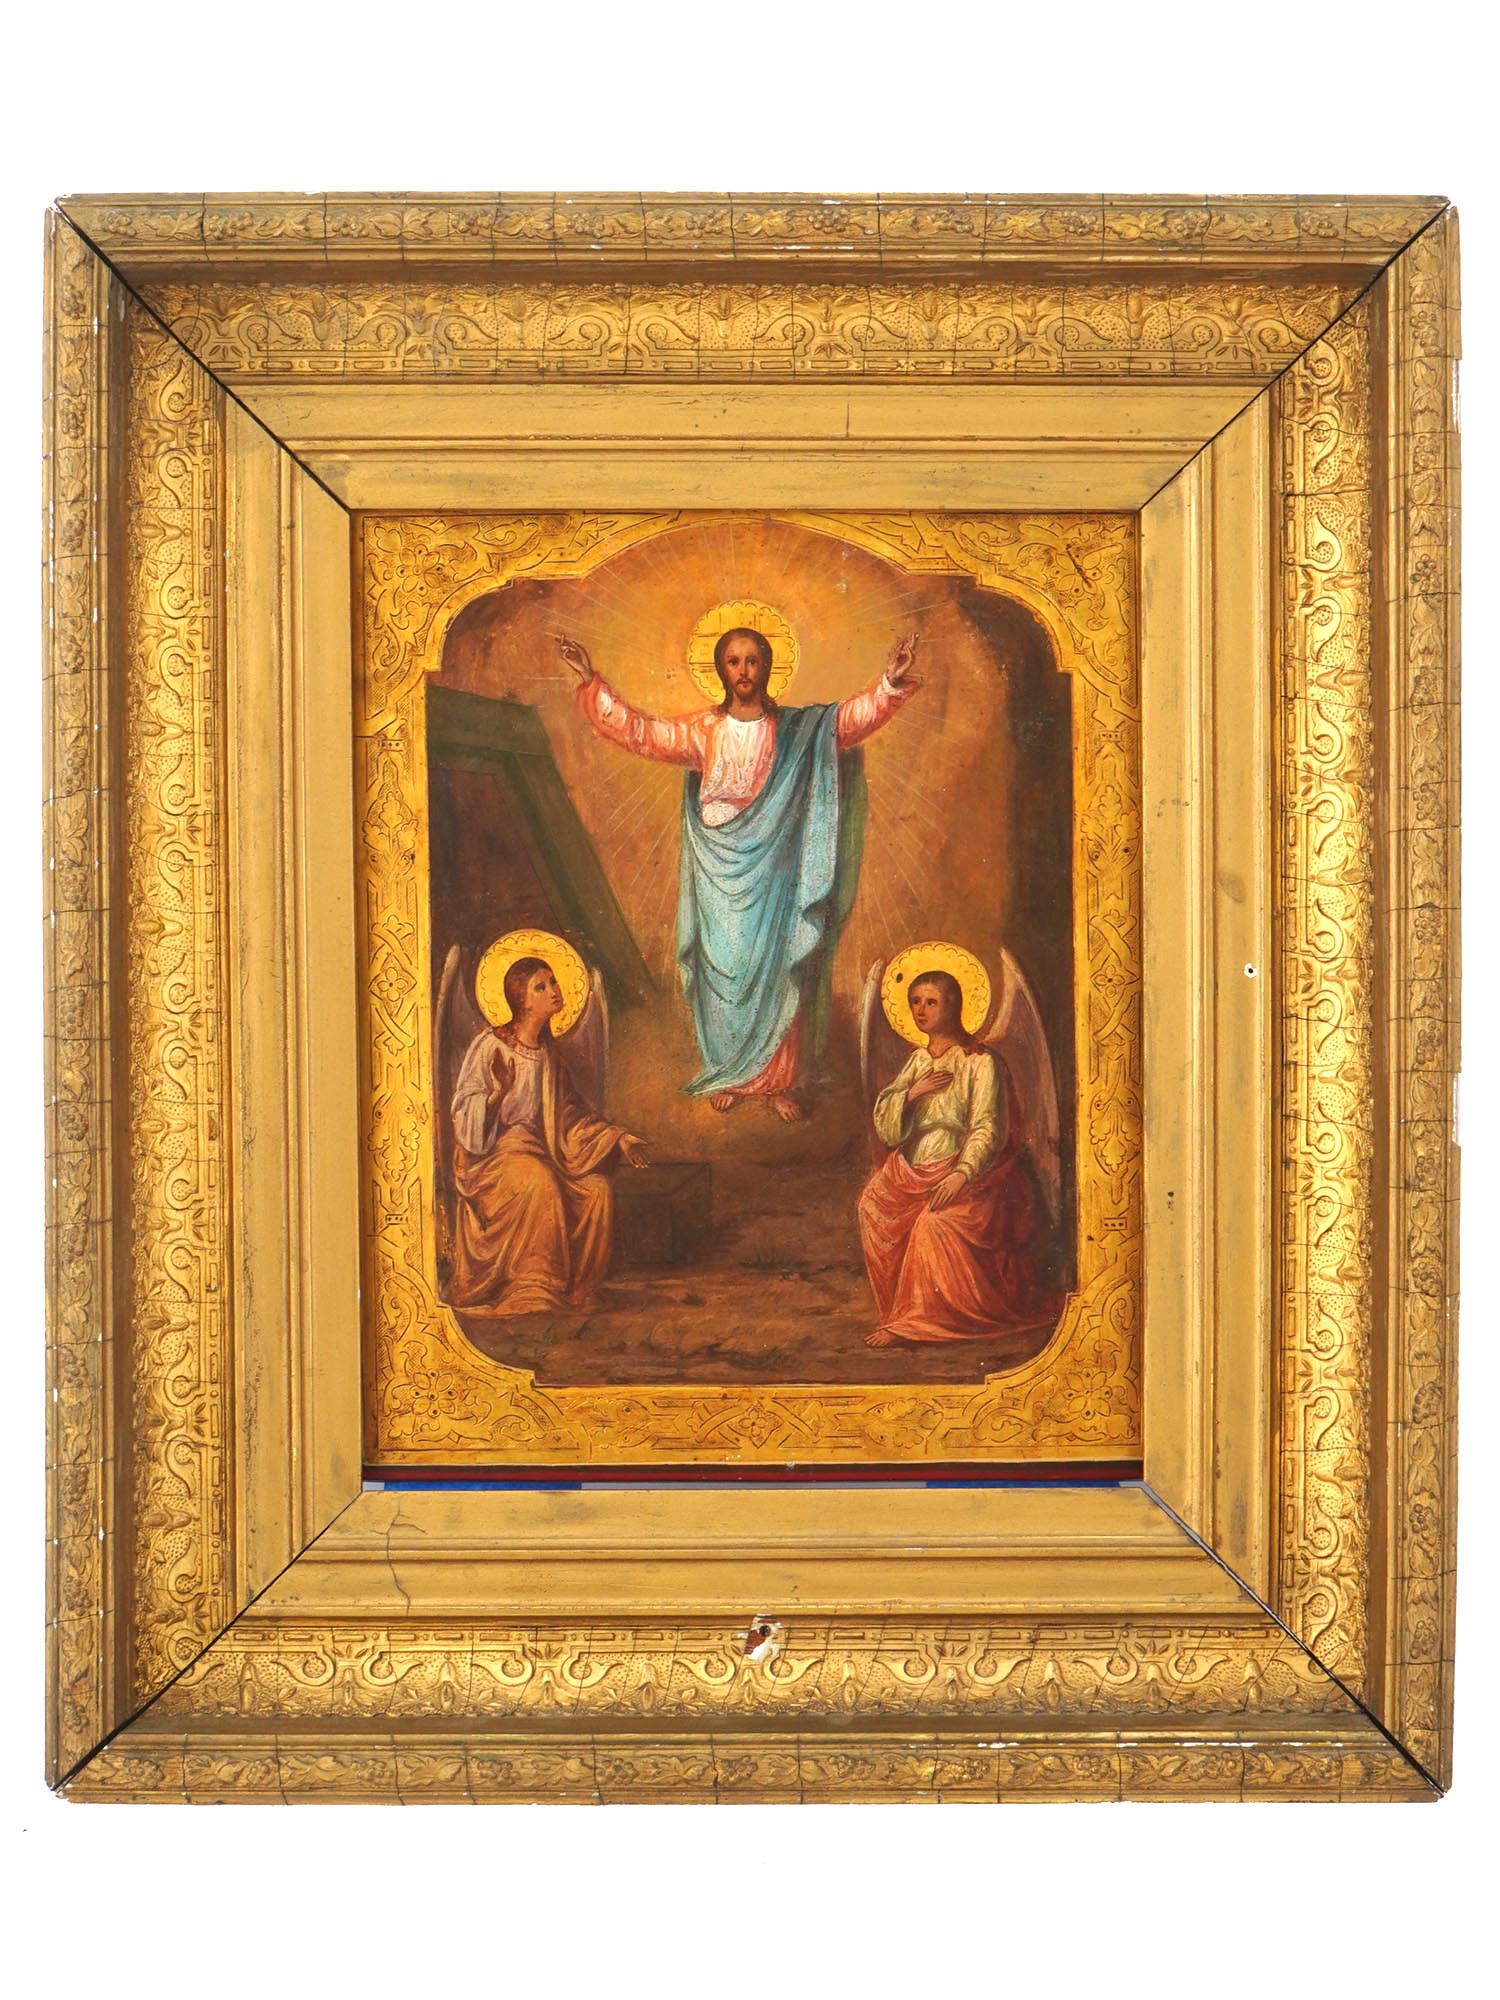 ANTIQUE RUSSIAN ORTHODOX RESURRECTION ICON FRAMED PIC-0